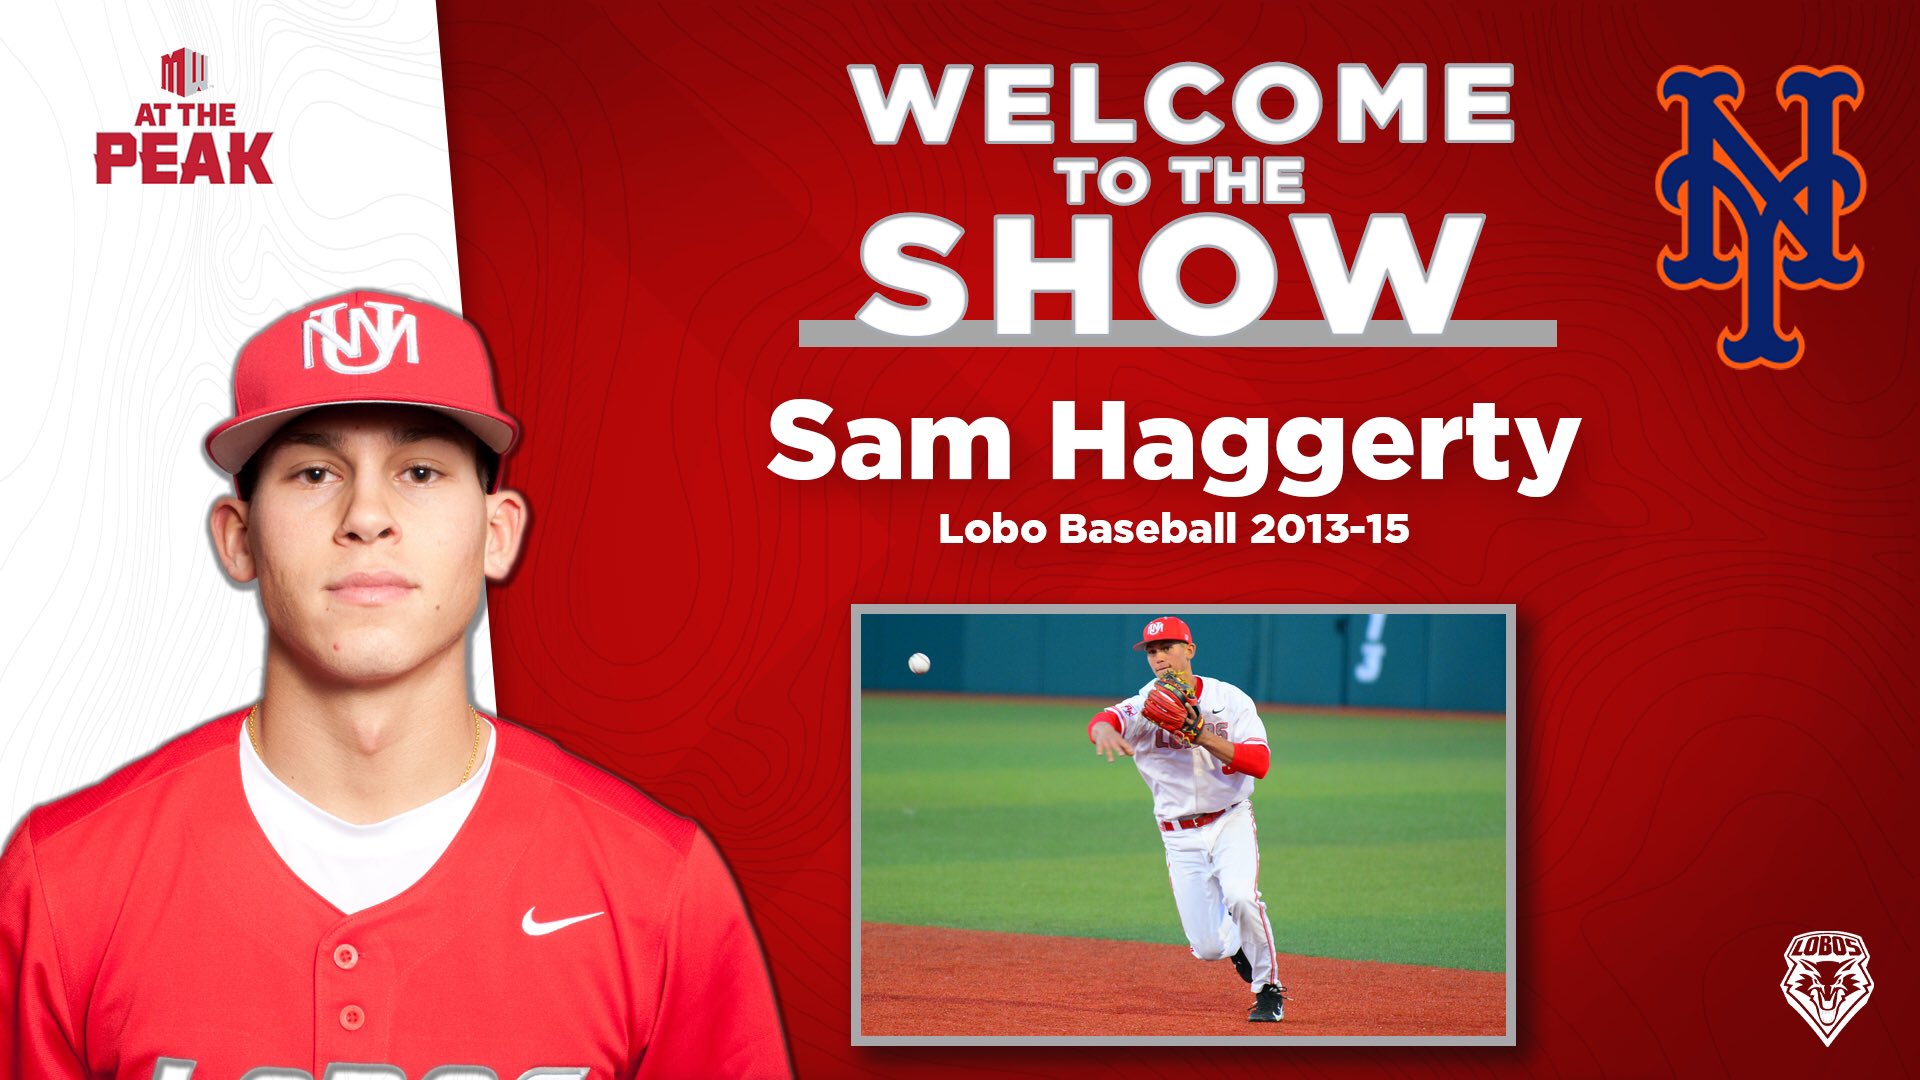 UNM Baseball on X: WELCOME TO THE SHOW! Sam Haggerty (2013-15